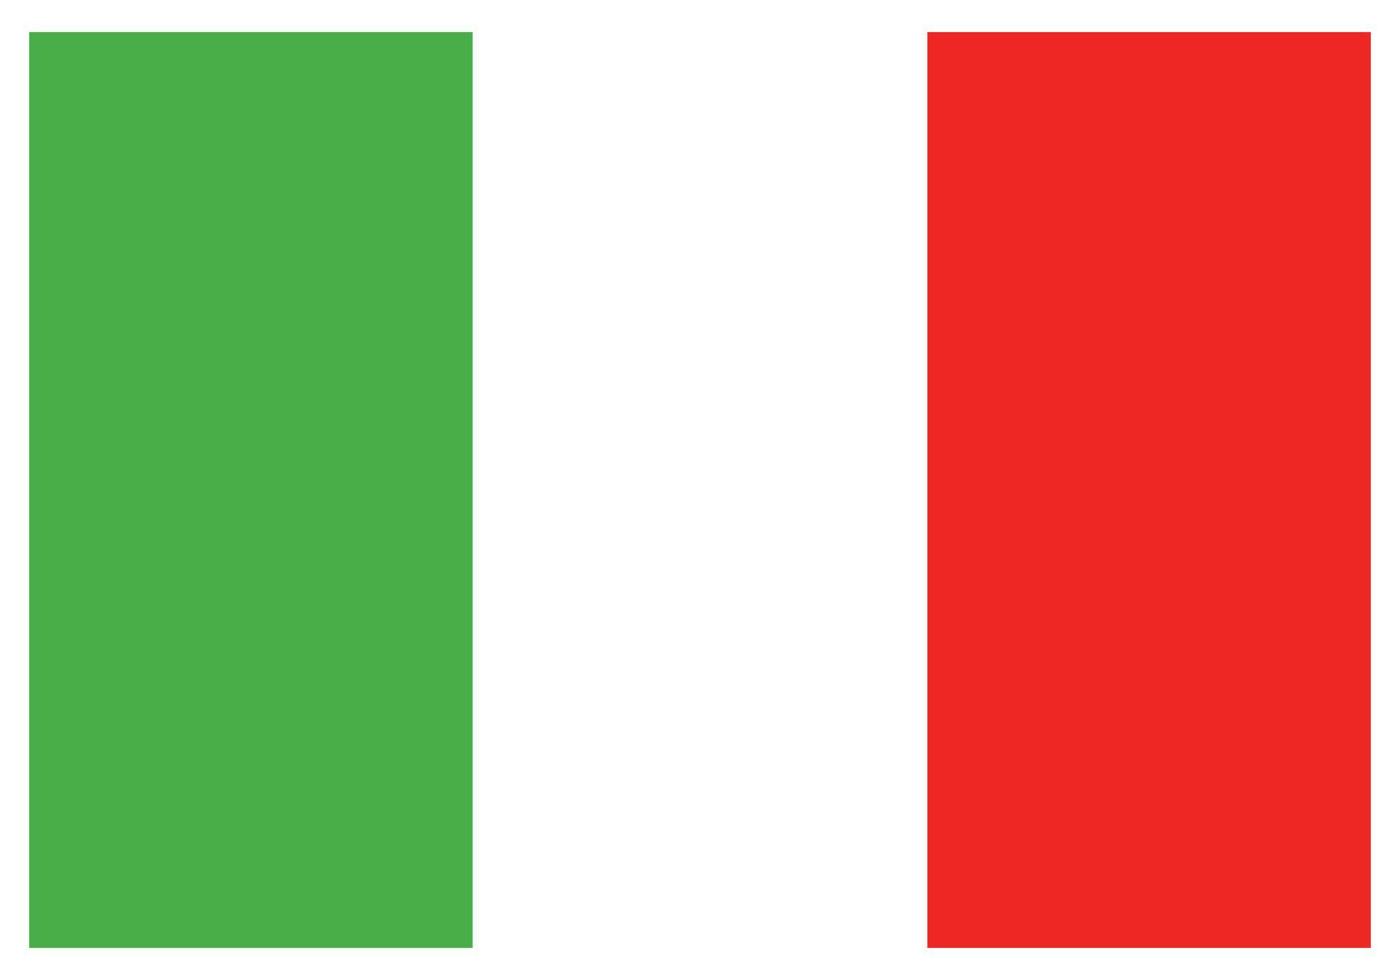 National flag of Italy - Flat color icon. vector